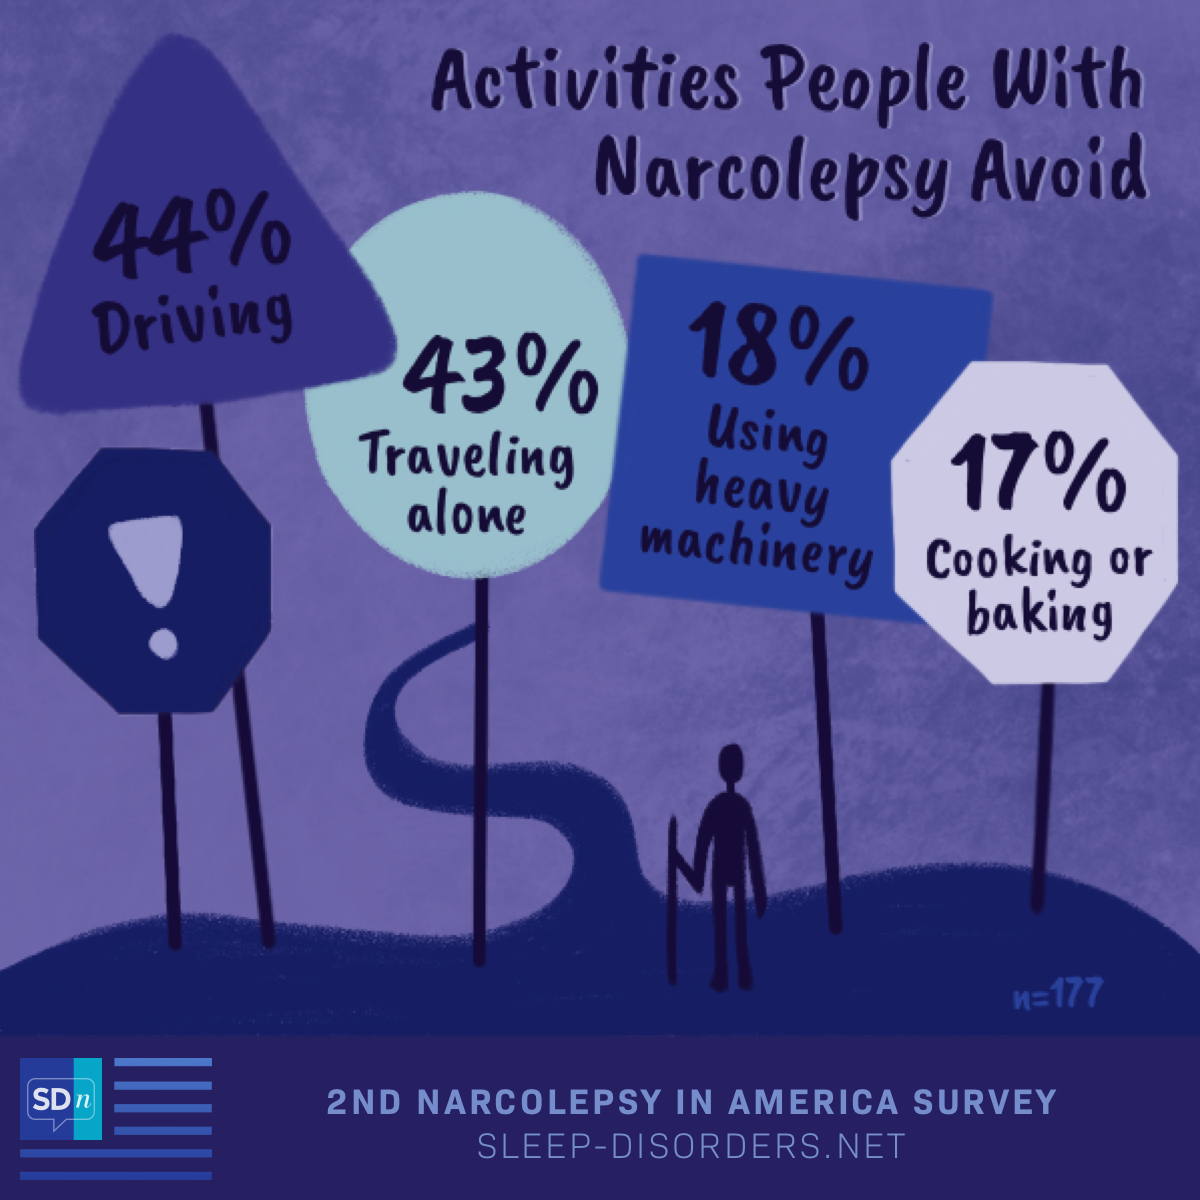 According to the 2nd Sleep Disorders In America survey, driving (44%), traveling alone (43%), using heavy machinery (18%) and cooking/baking (17%) are activities people with narcolepsy avoid.